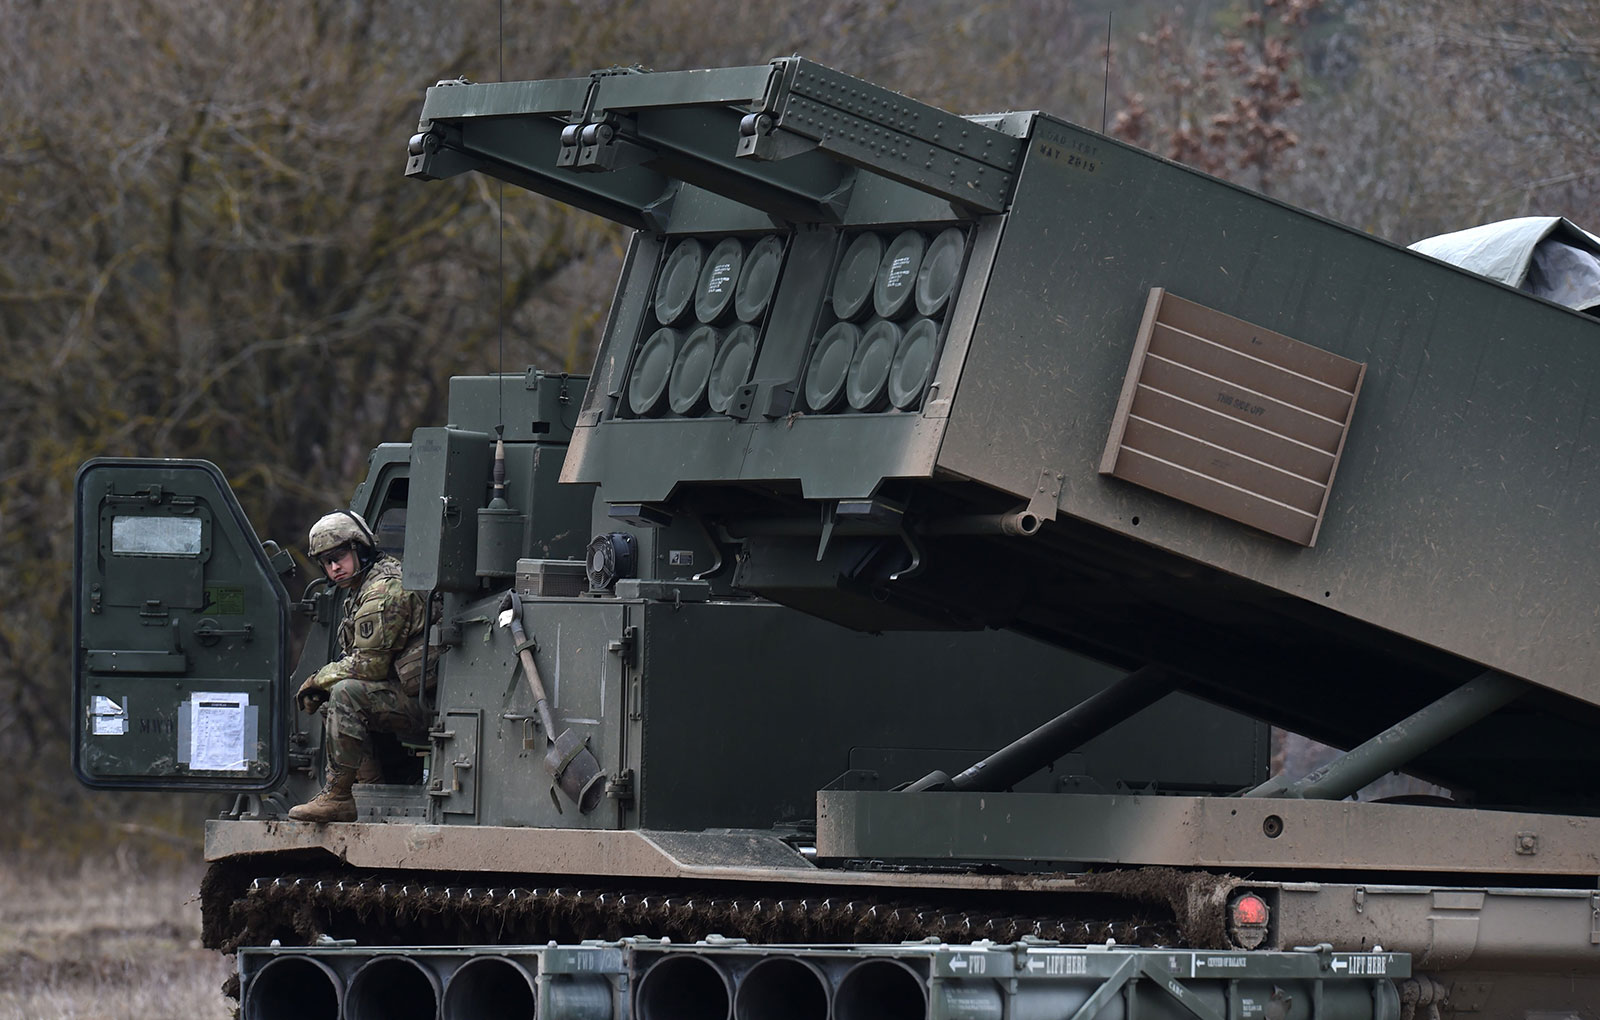 In this file image from 2020, A US soldier sits at a Multiple Launch Rocket System after an artillery live fire event by the US Army Europe's 41st Field Artillery Brigade at the military training area in Grafenwoehr, Germany.